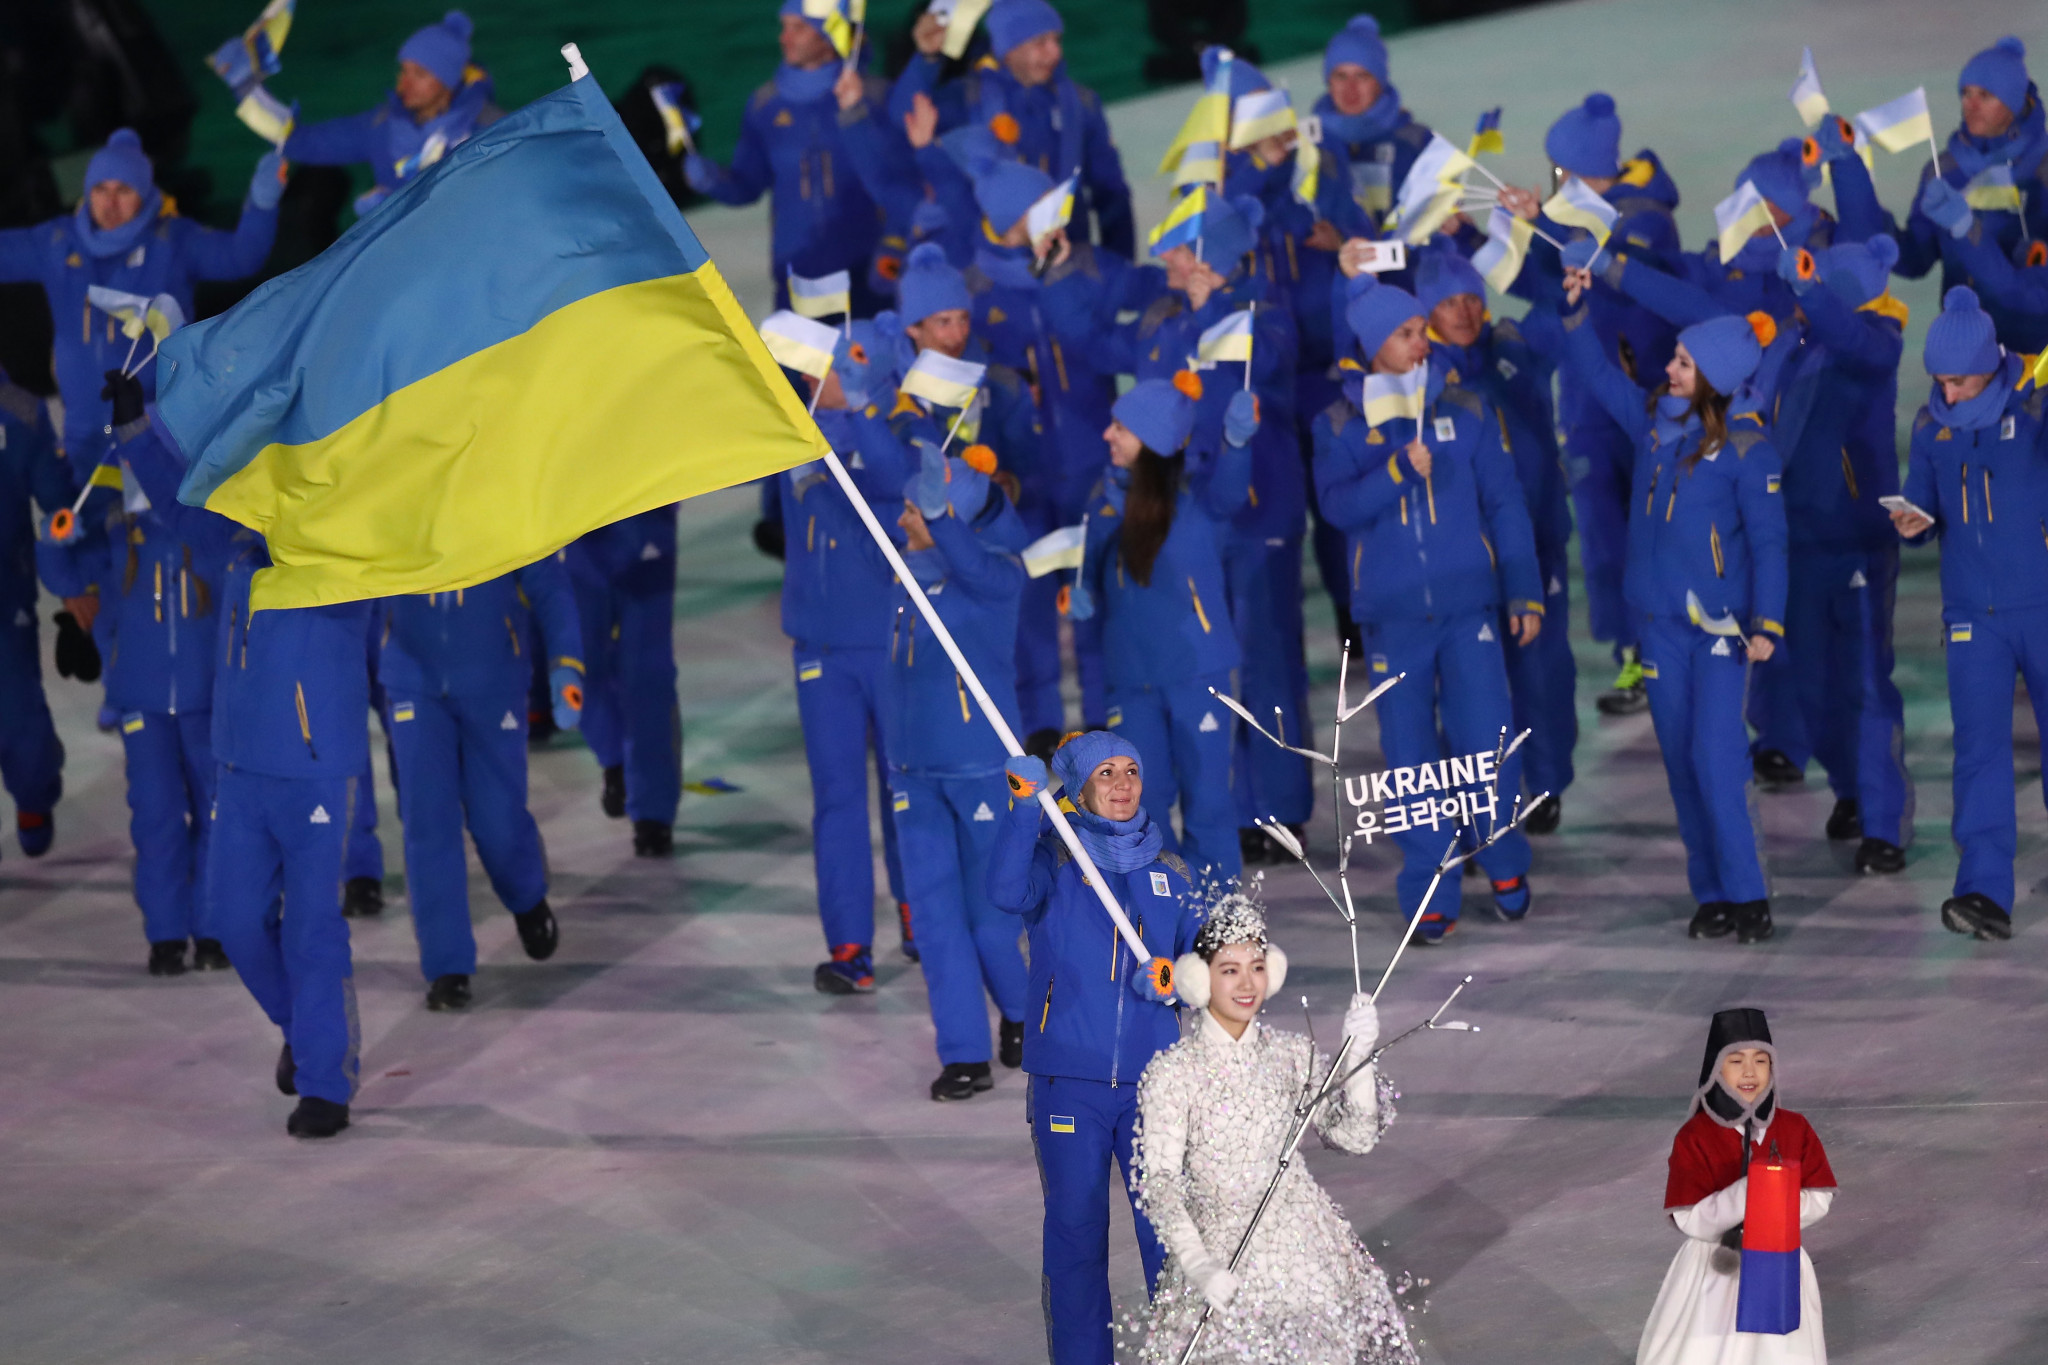 Ukraine Receives Another Olympic License